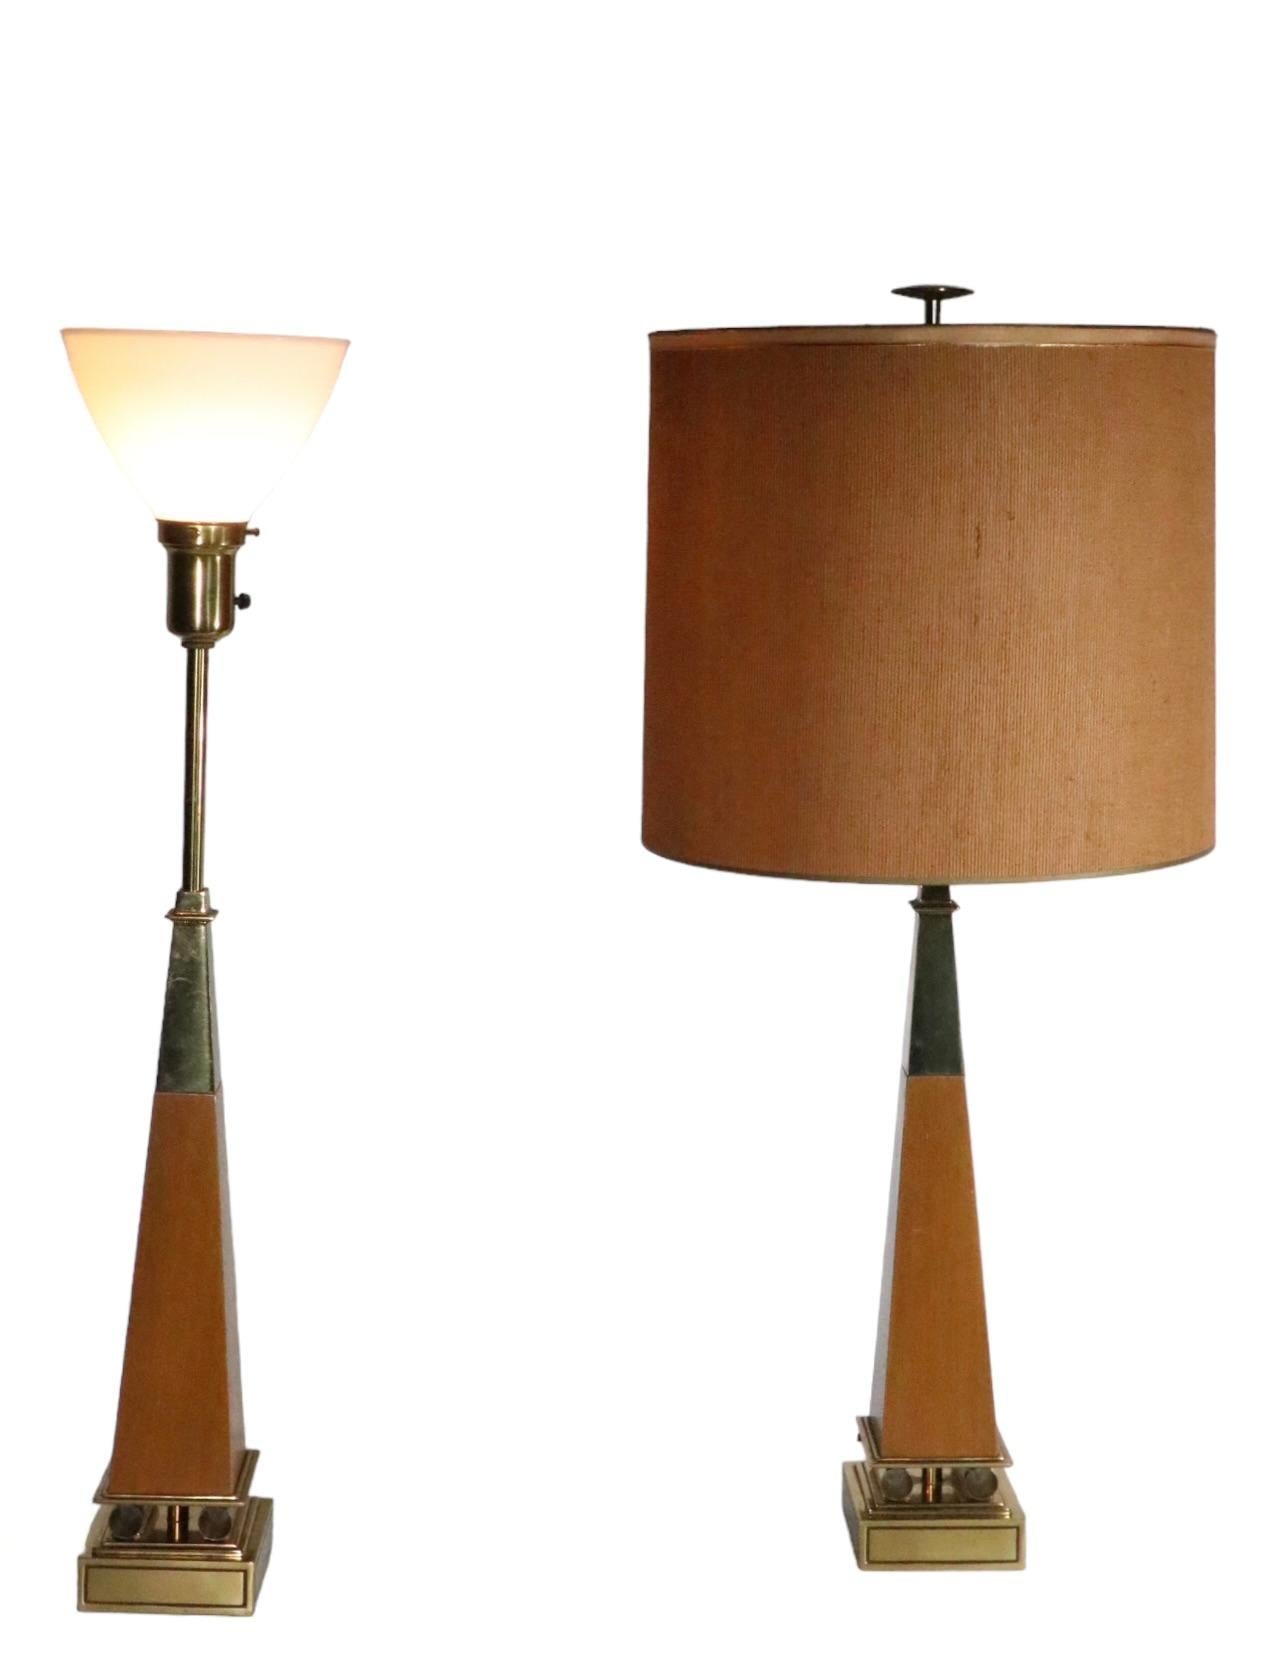 Pair Hollywood Regency Obelisk Table Lamps by Stiffel Att. to Parzinger For Sale 13